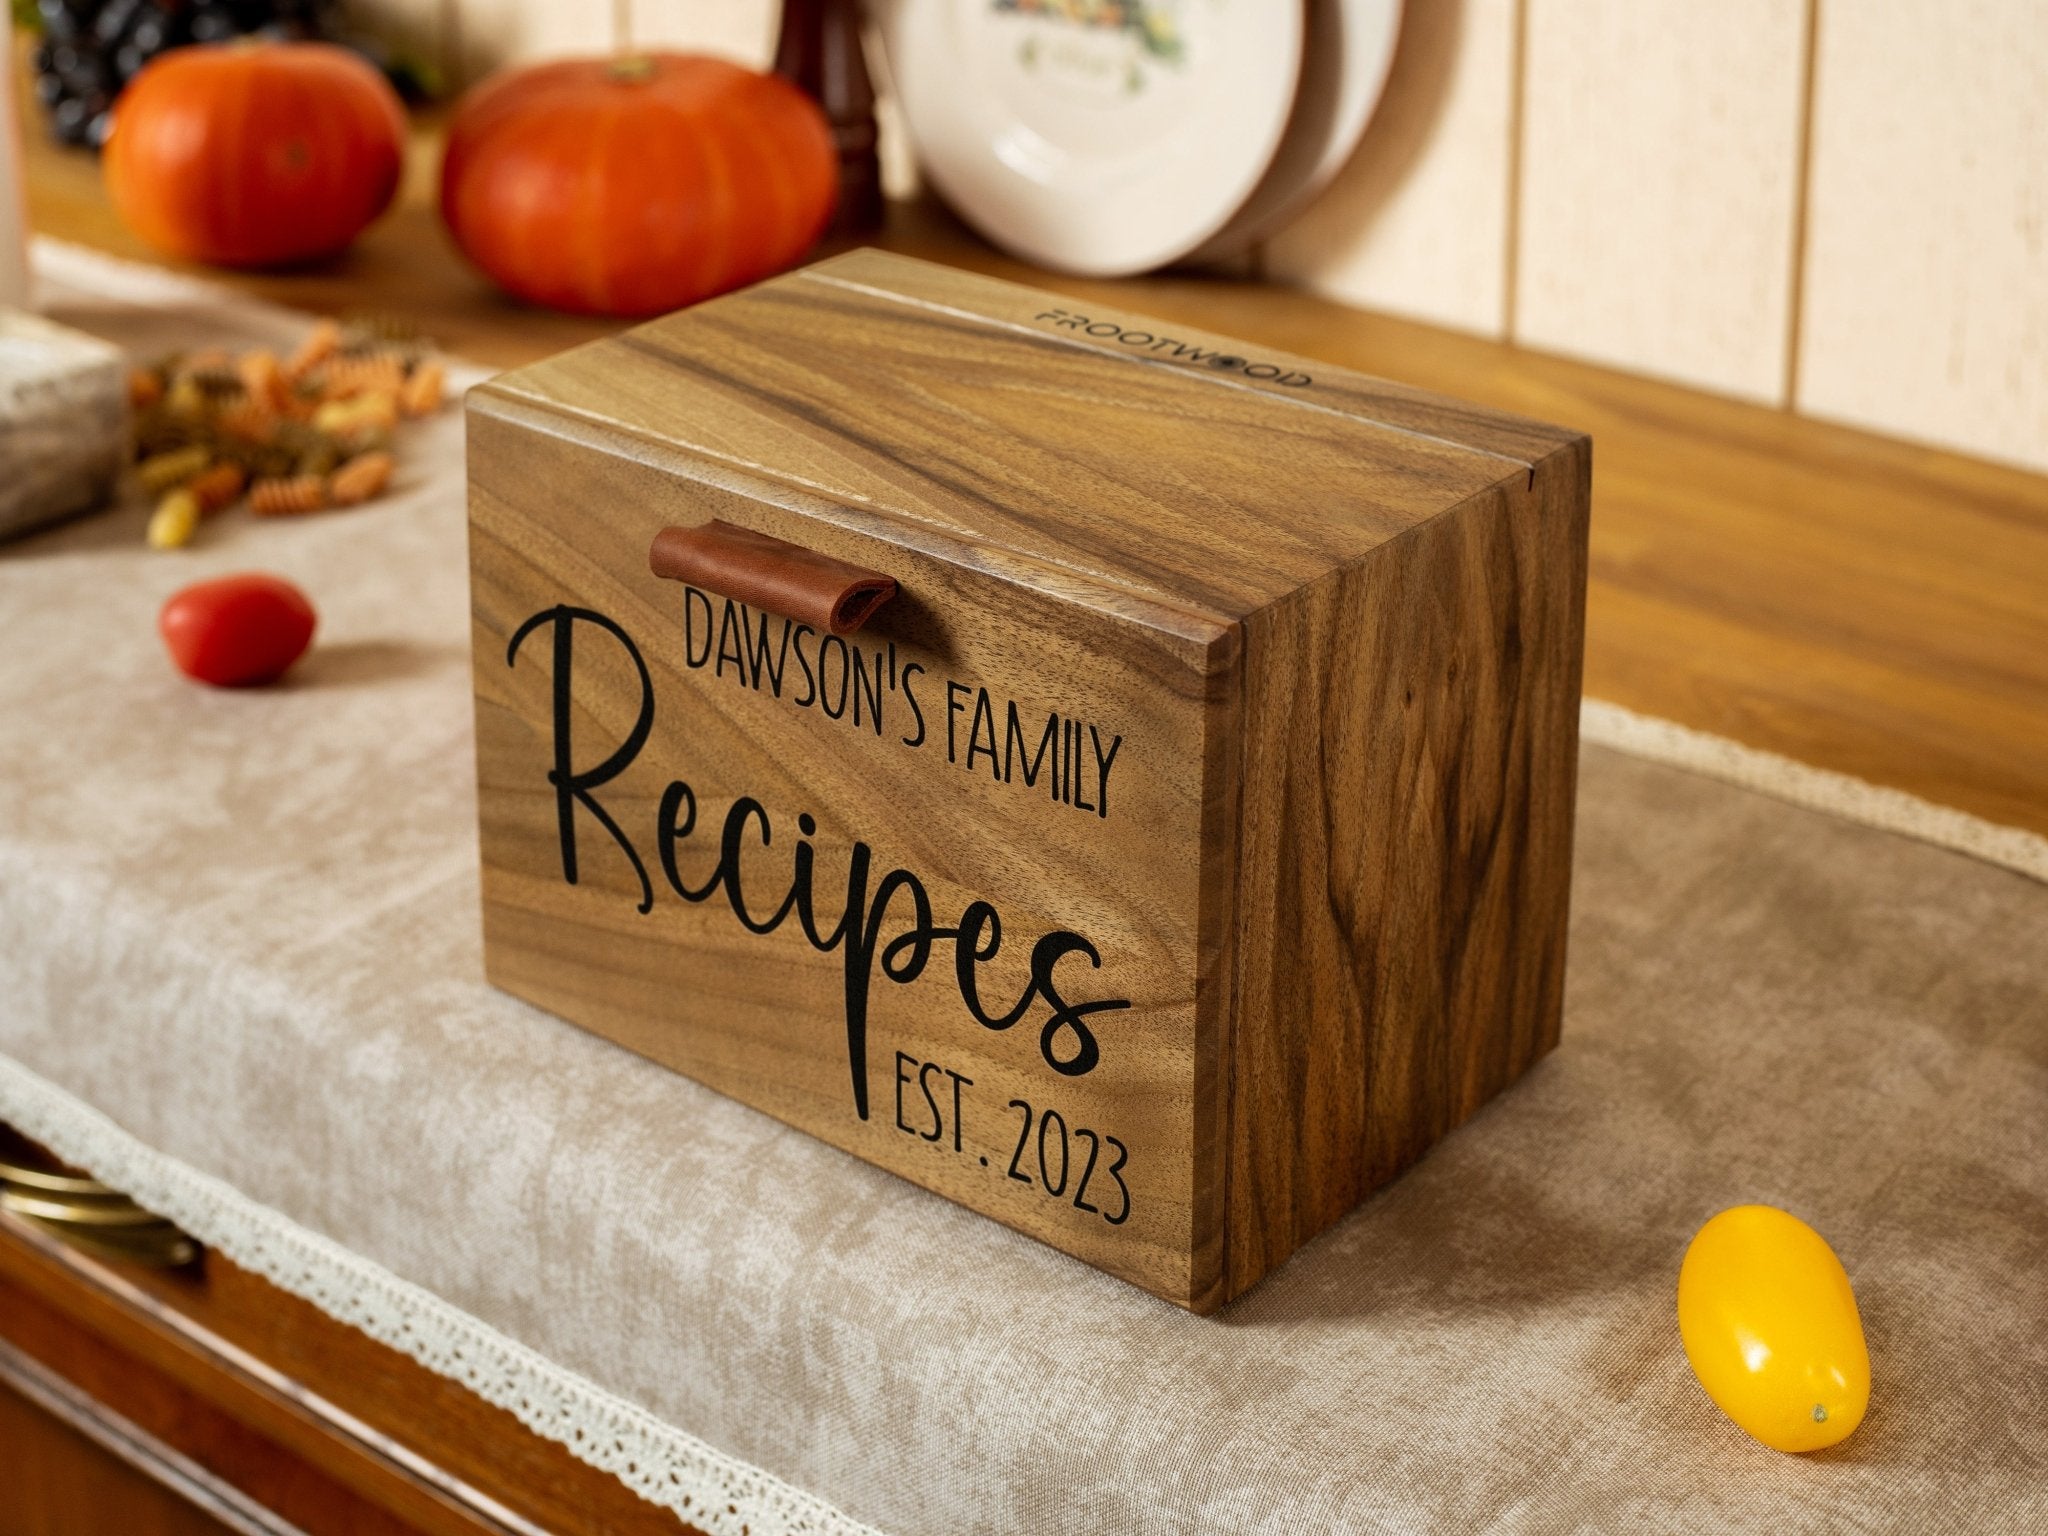 Personalized Recipe Box - St George Leather Shop